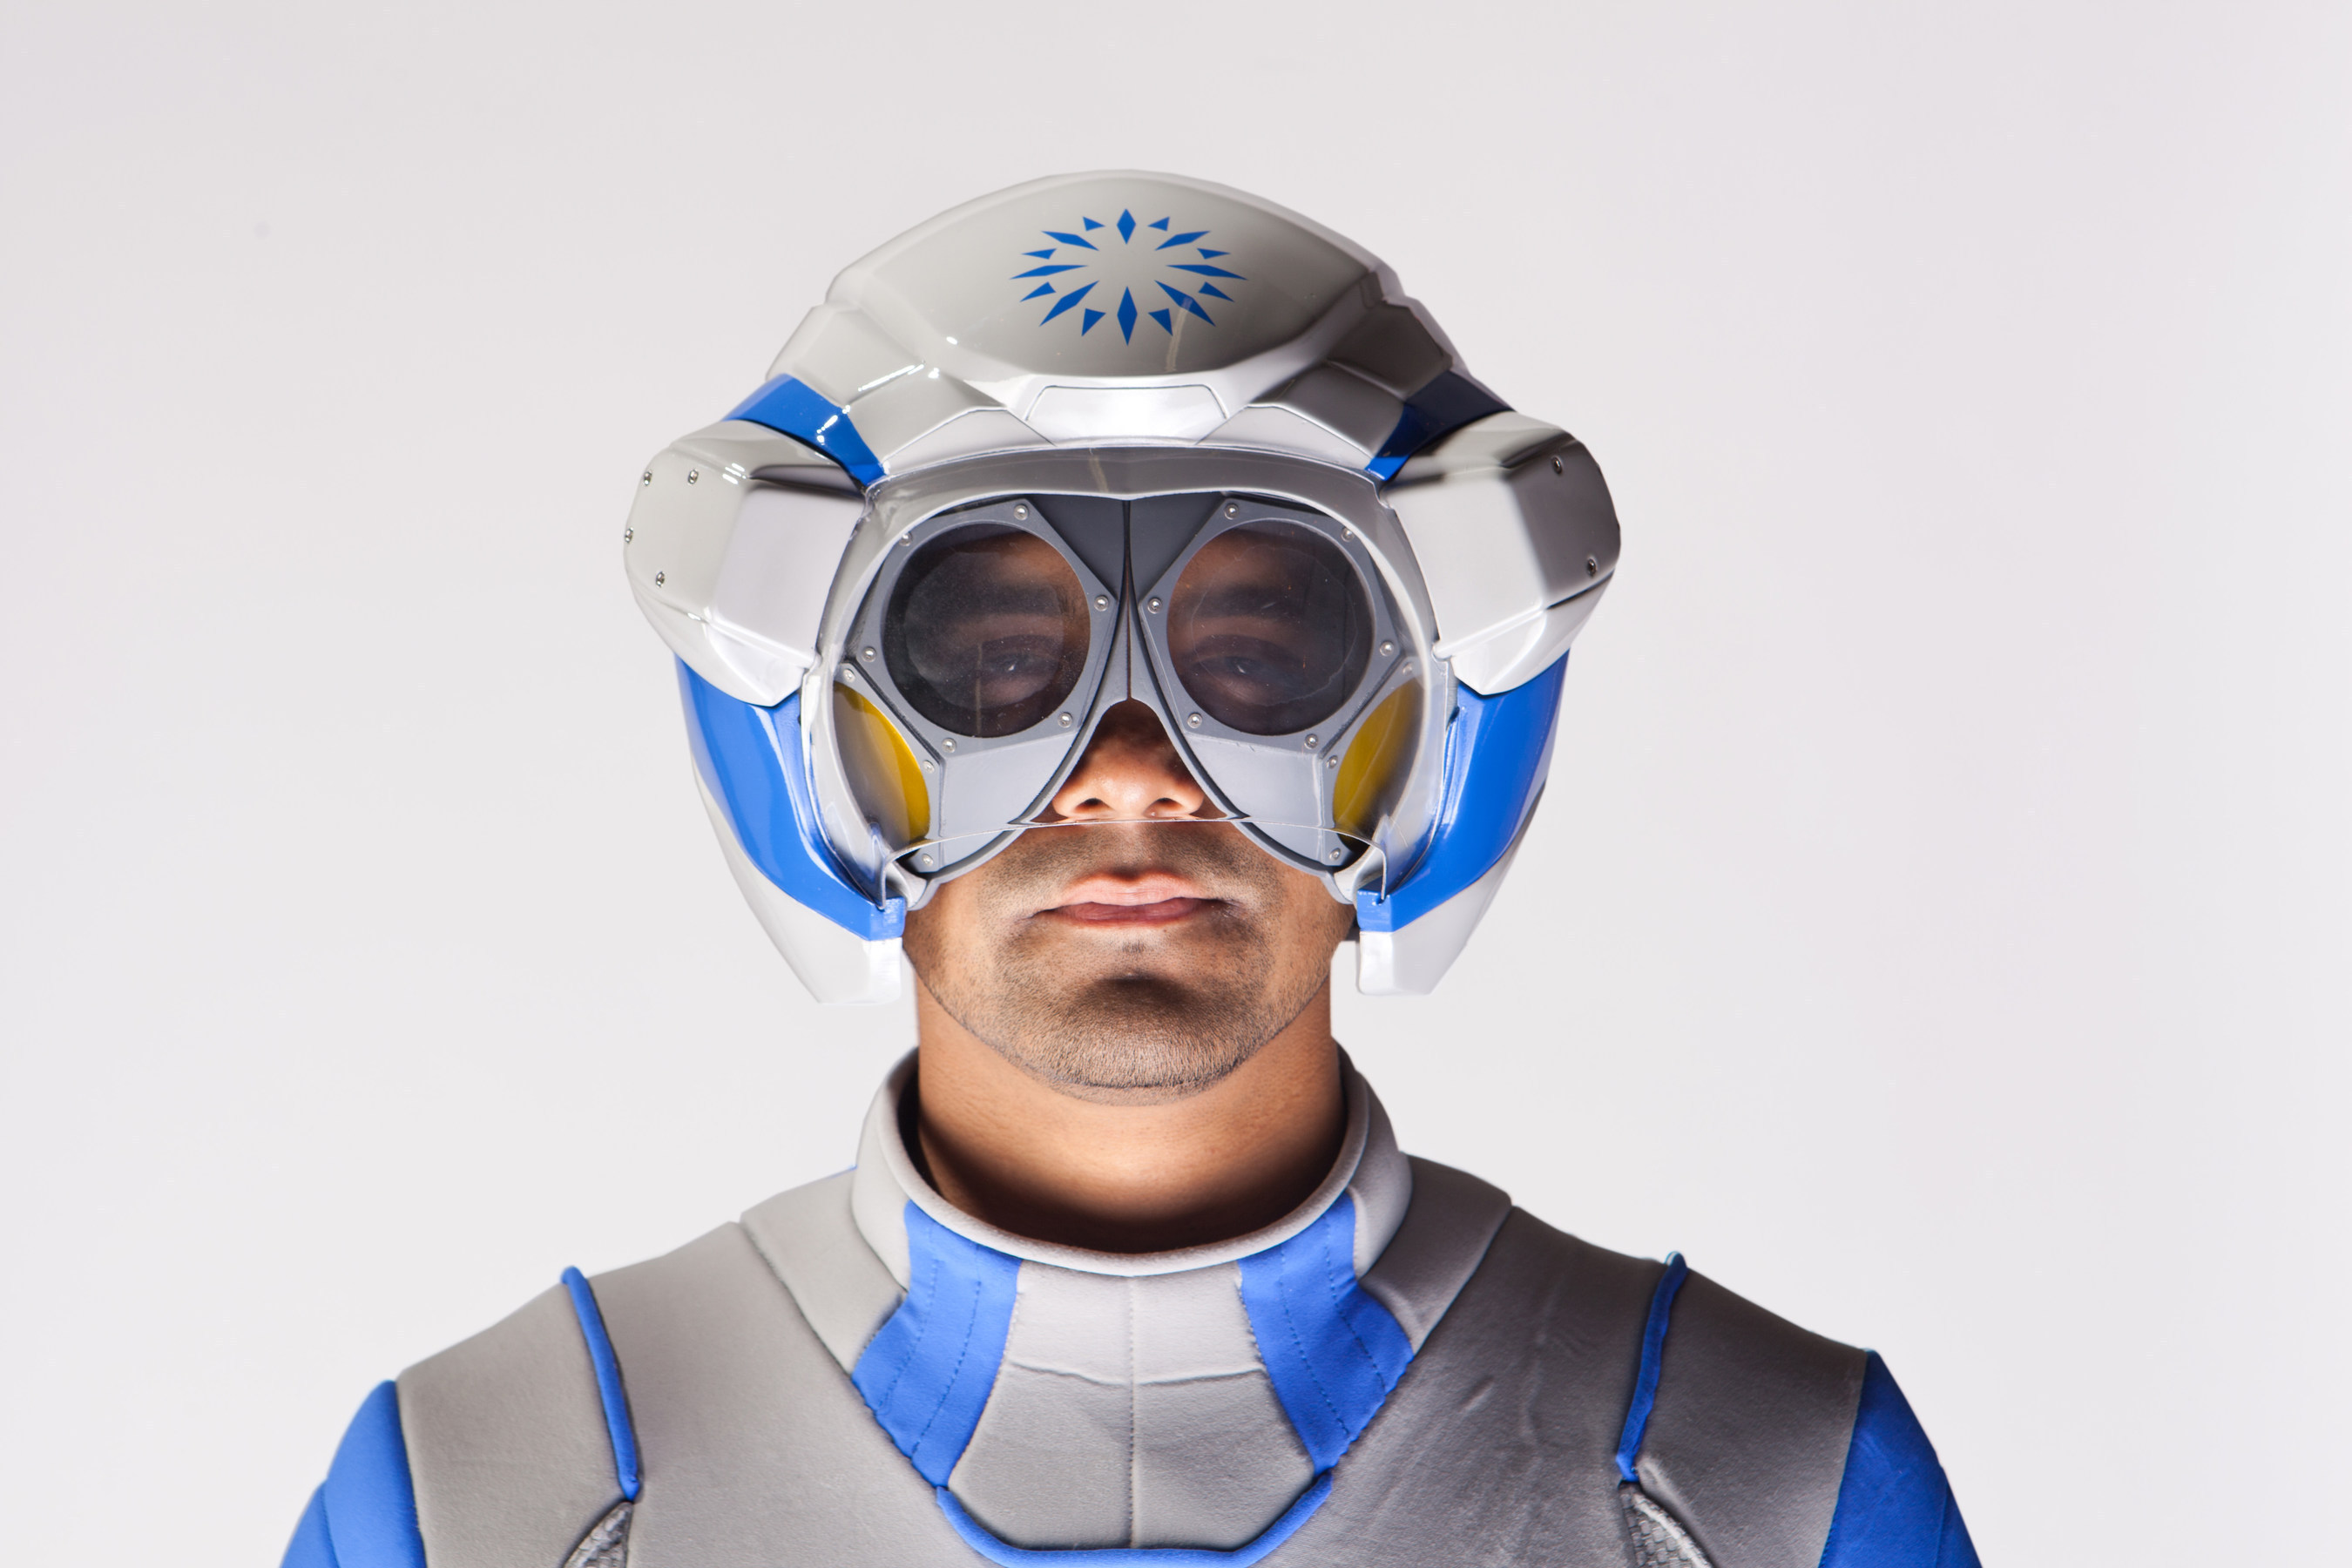 The Genworth R70, a first of its kind, state of the art, age simulation suit, features a helmet with acoustic muffling that gives the effect of hearing loss that often occurs with aging as well as lenses that simulate declines in vision plus the common vision disorders that occur with aging.  Genworth developed the suit to help raise awareness about the need for long term care planning and educate the public on the physical effects associated with aging. Genworth unveiled the suit on Thursday, Nov. 20, 2014, at the Social Innovation Summit in Silicon Valley, California.